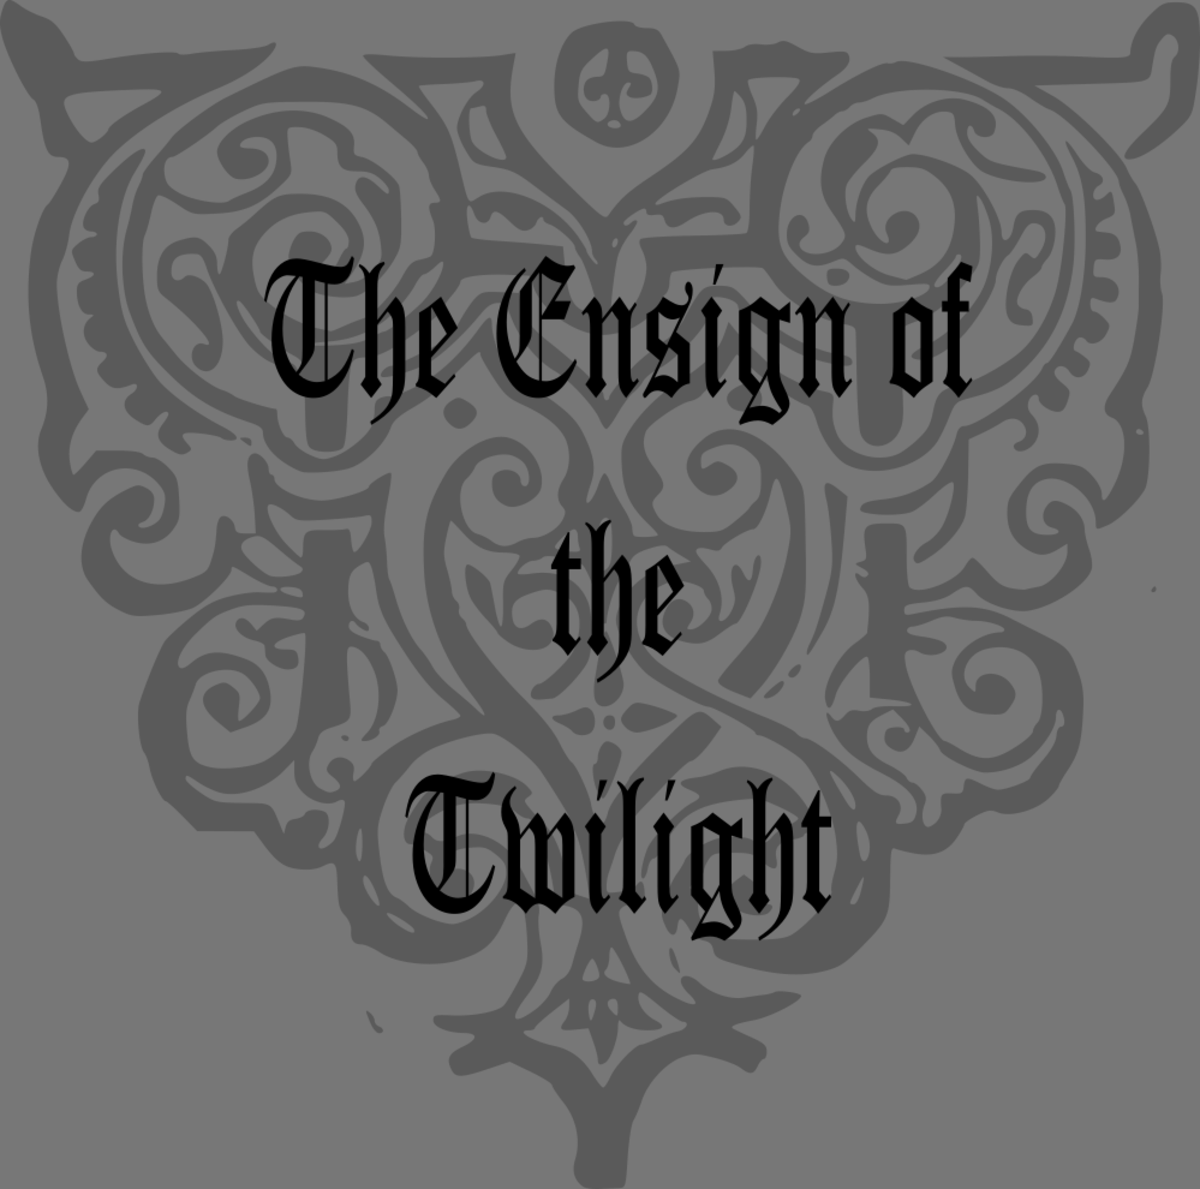 Ensign of the Twilight